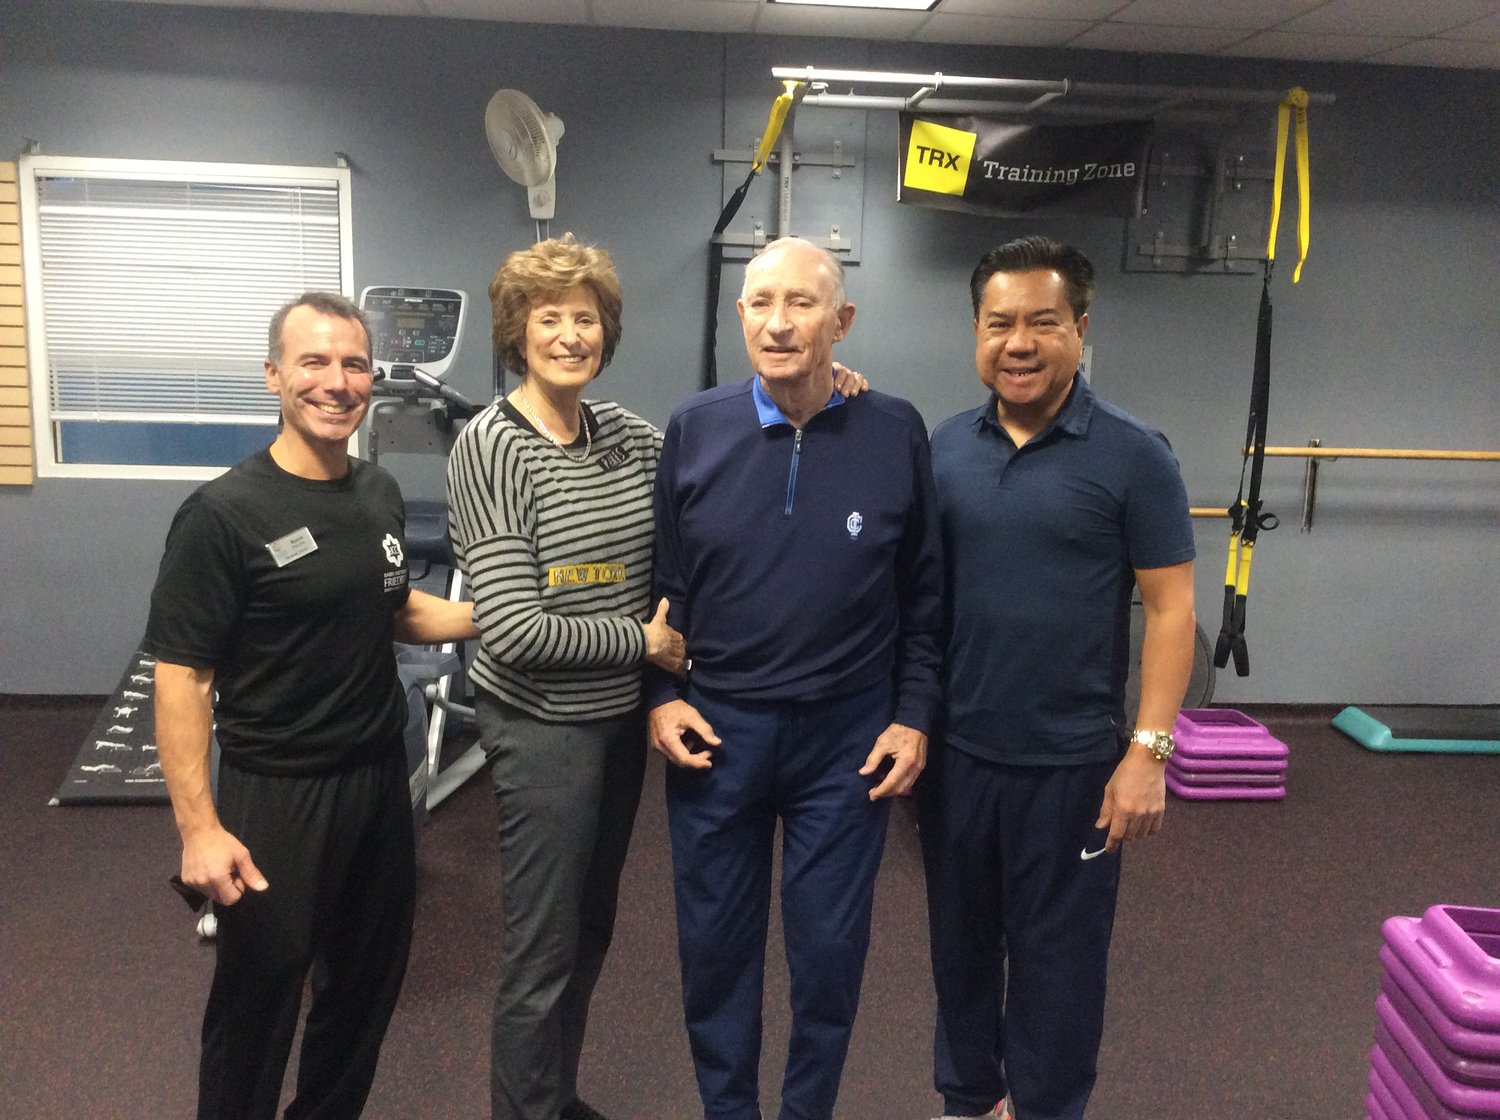 JCC personal trainer Rocco Perrrotta, Alzheimer’s disease patient Armand Lindenbaum and his wife, Jean, along with Armand’s caretaker, Michael Alunan